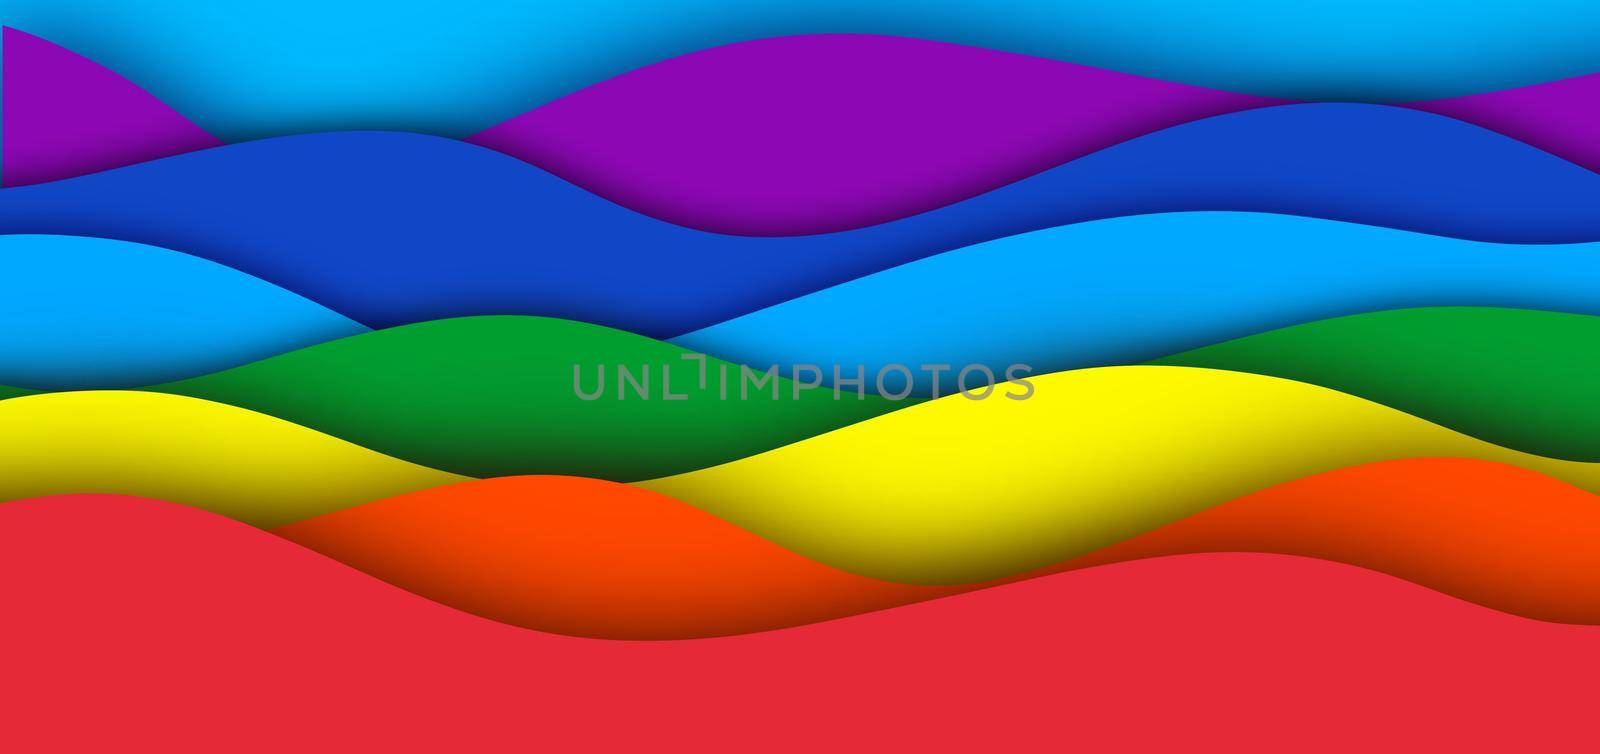 Abstract rainbow paper cut design. Multicoloured layered horizontal banner. Pride month background. High quality illustration